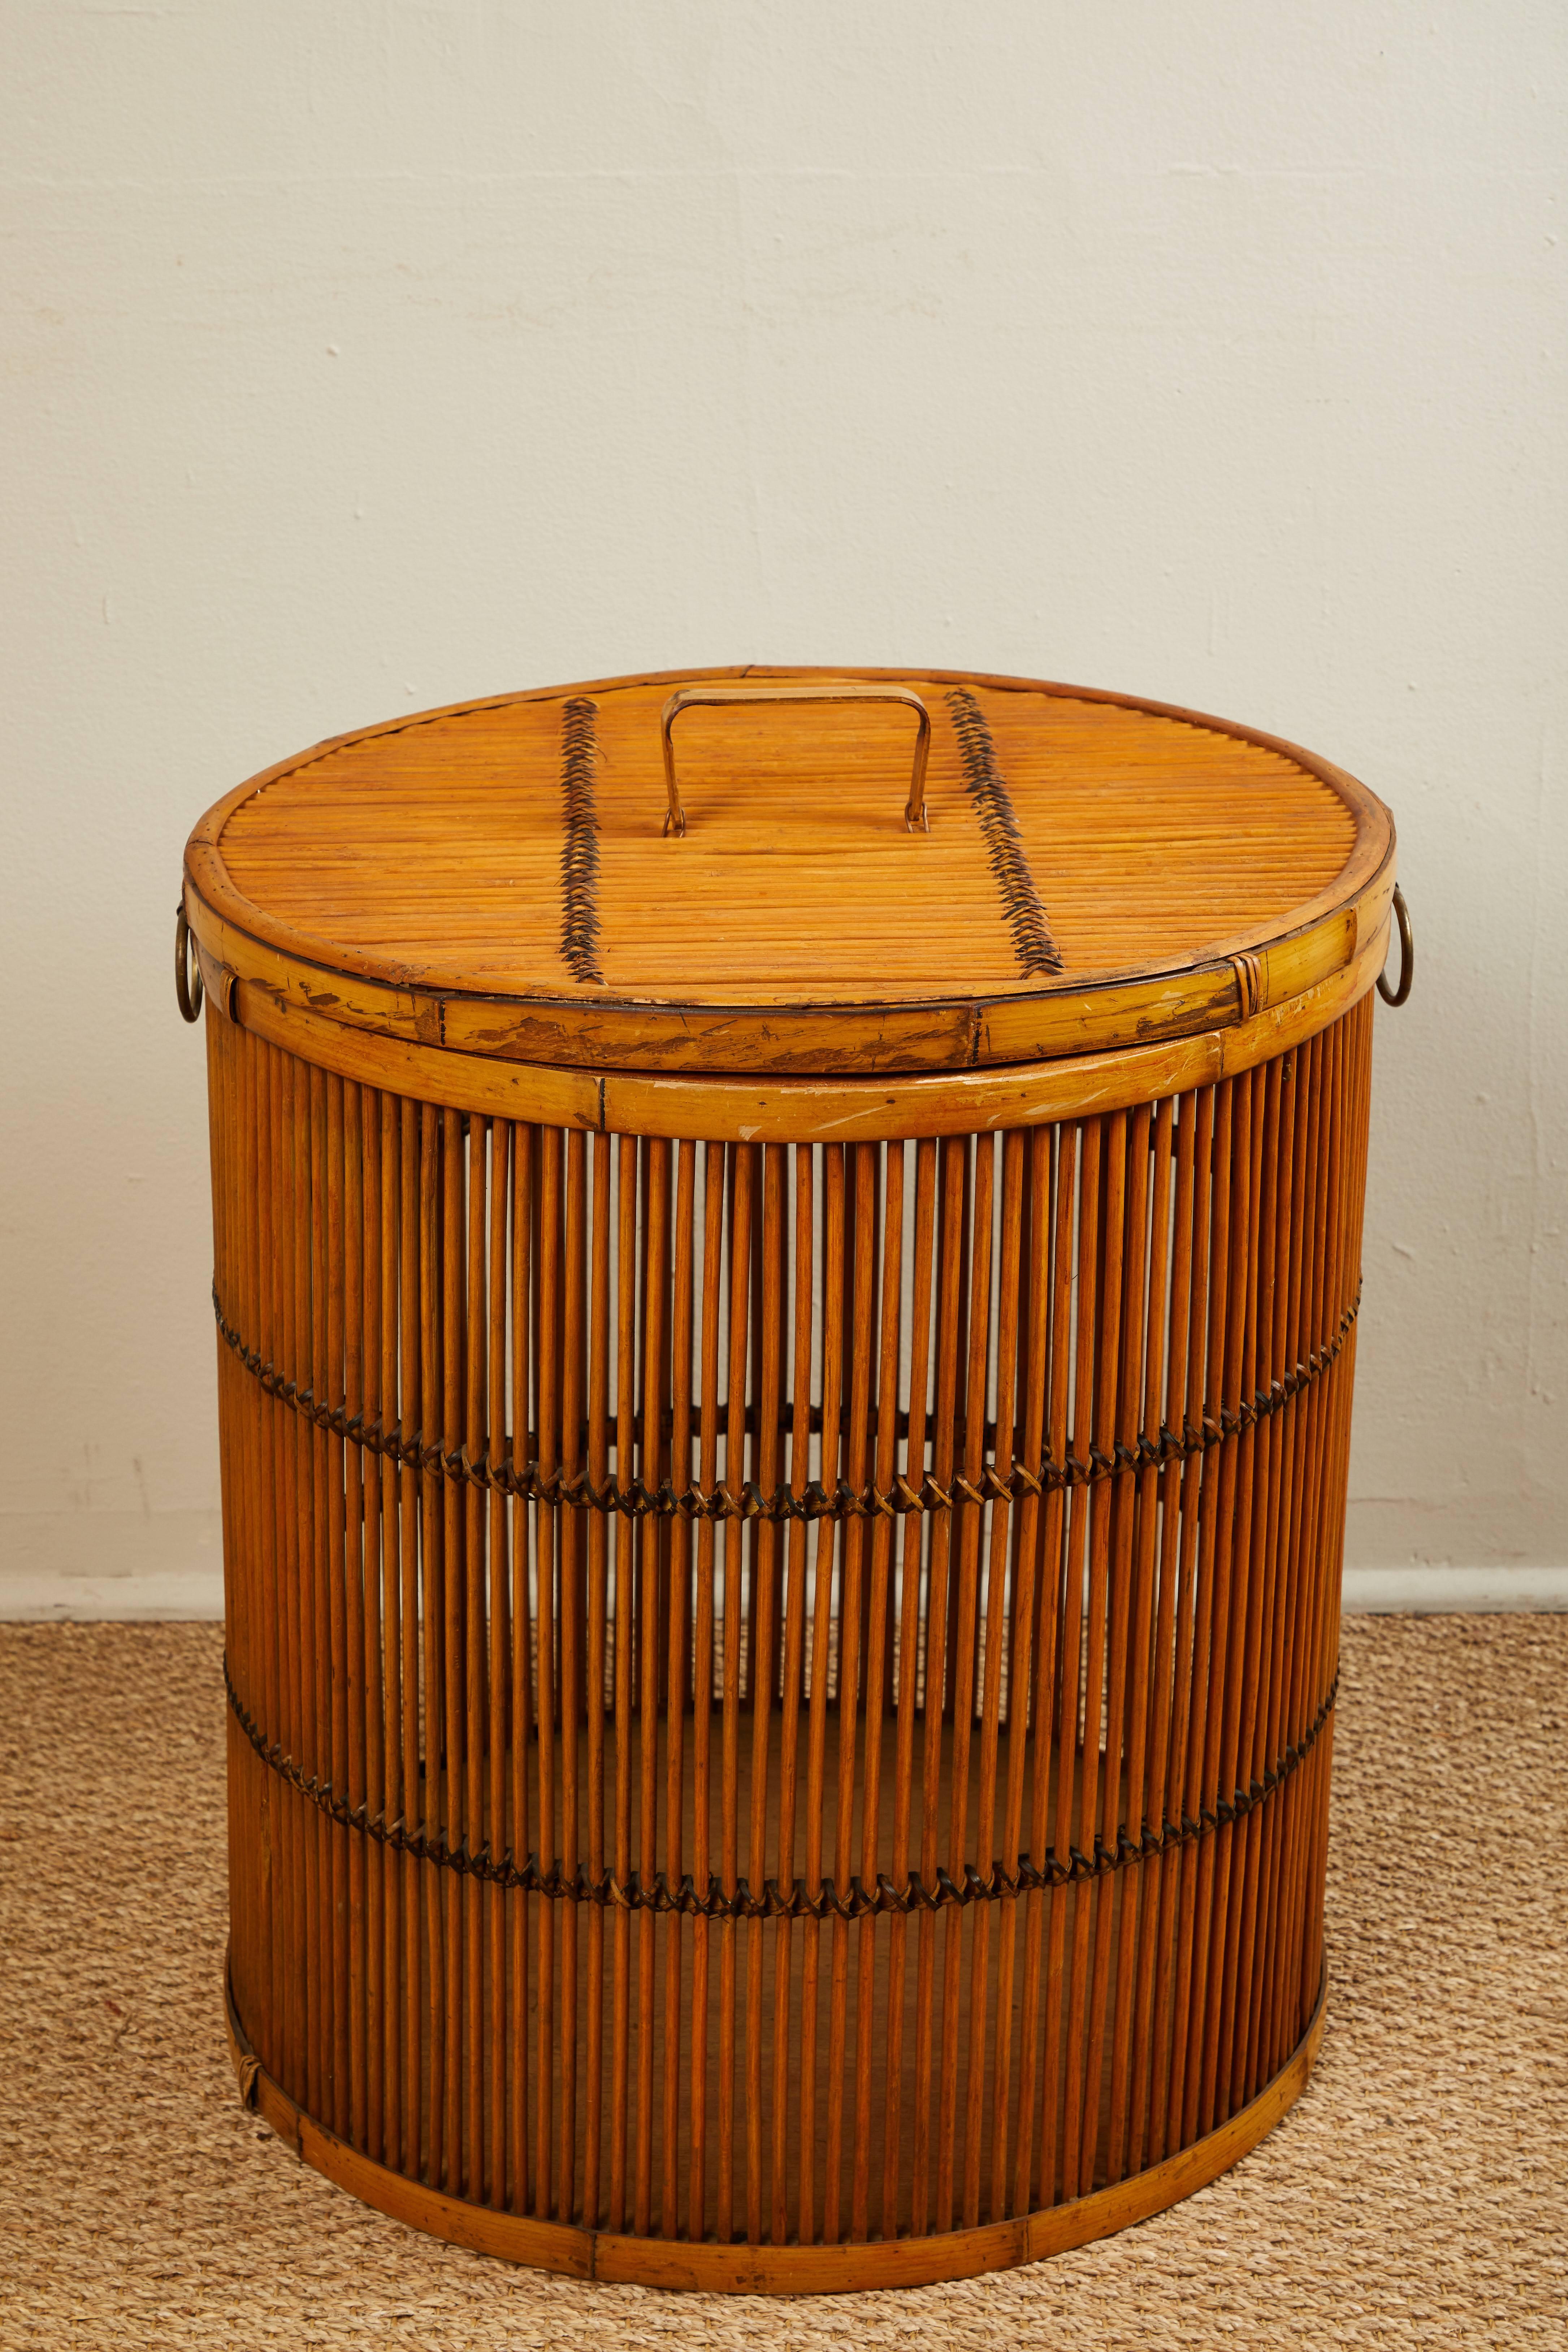 Vintage rattan laundry basket with fitted top.
 